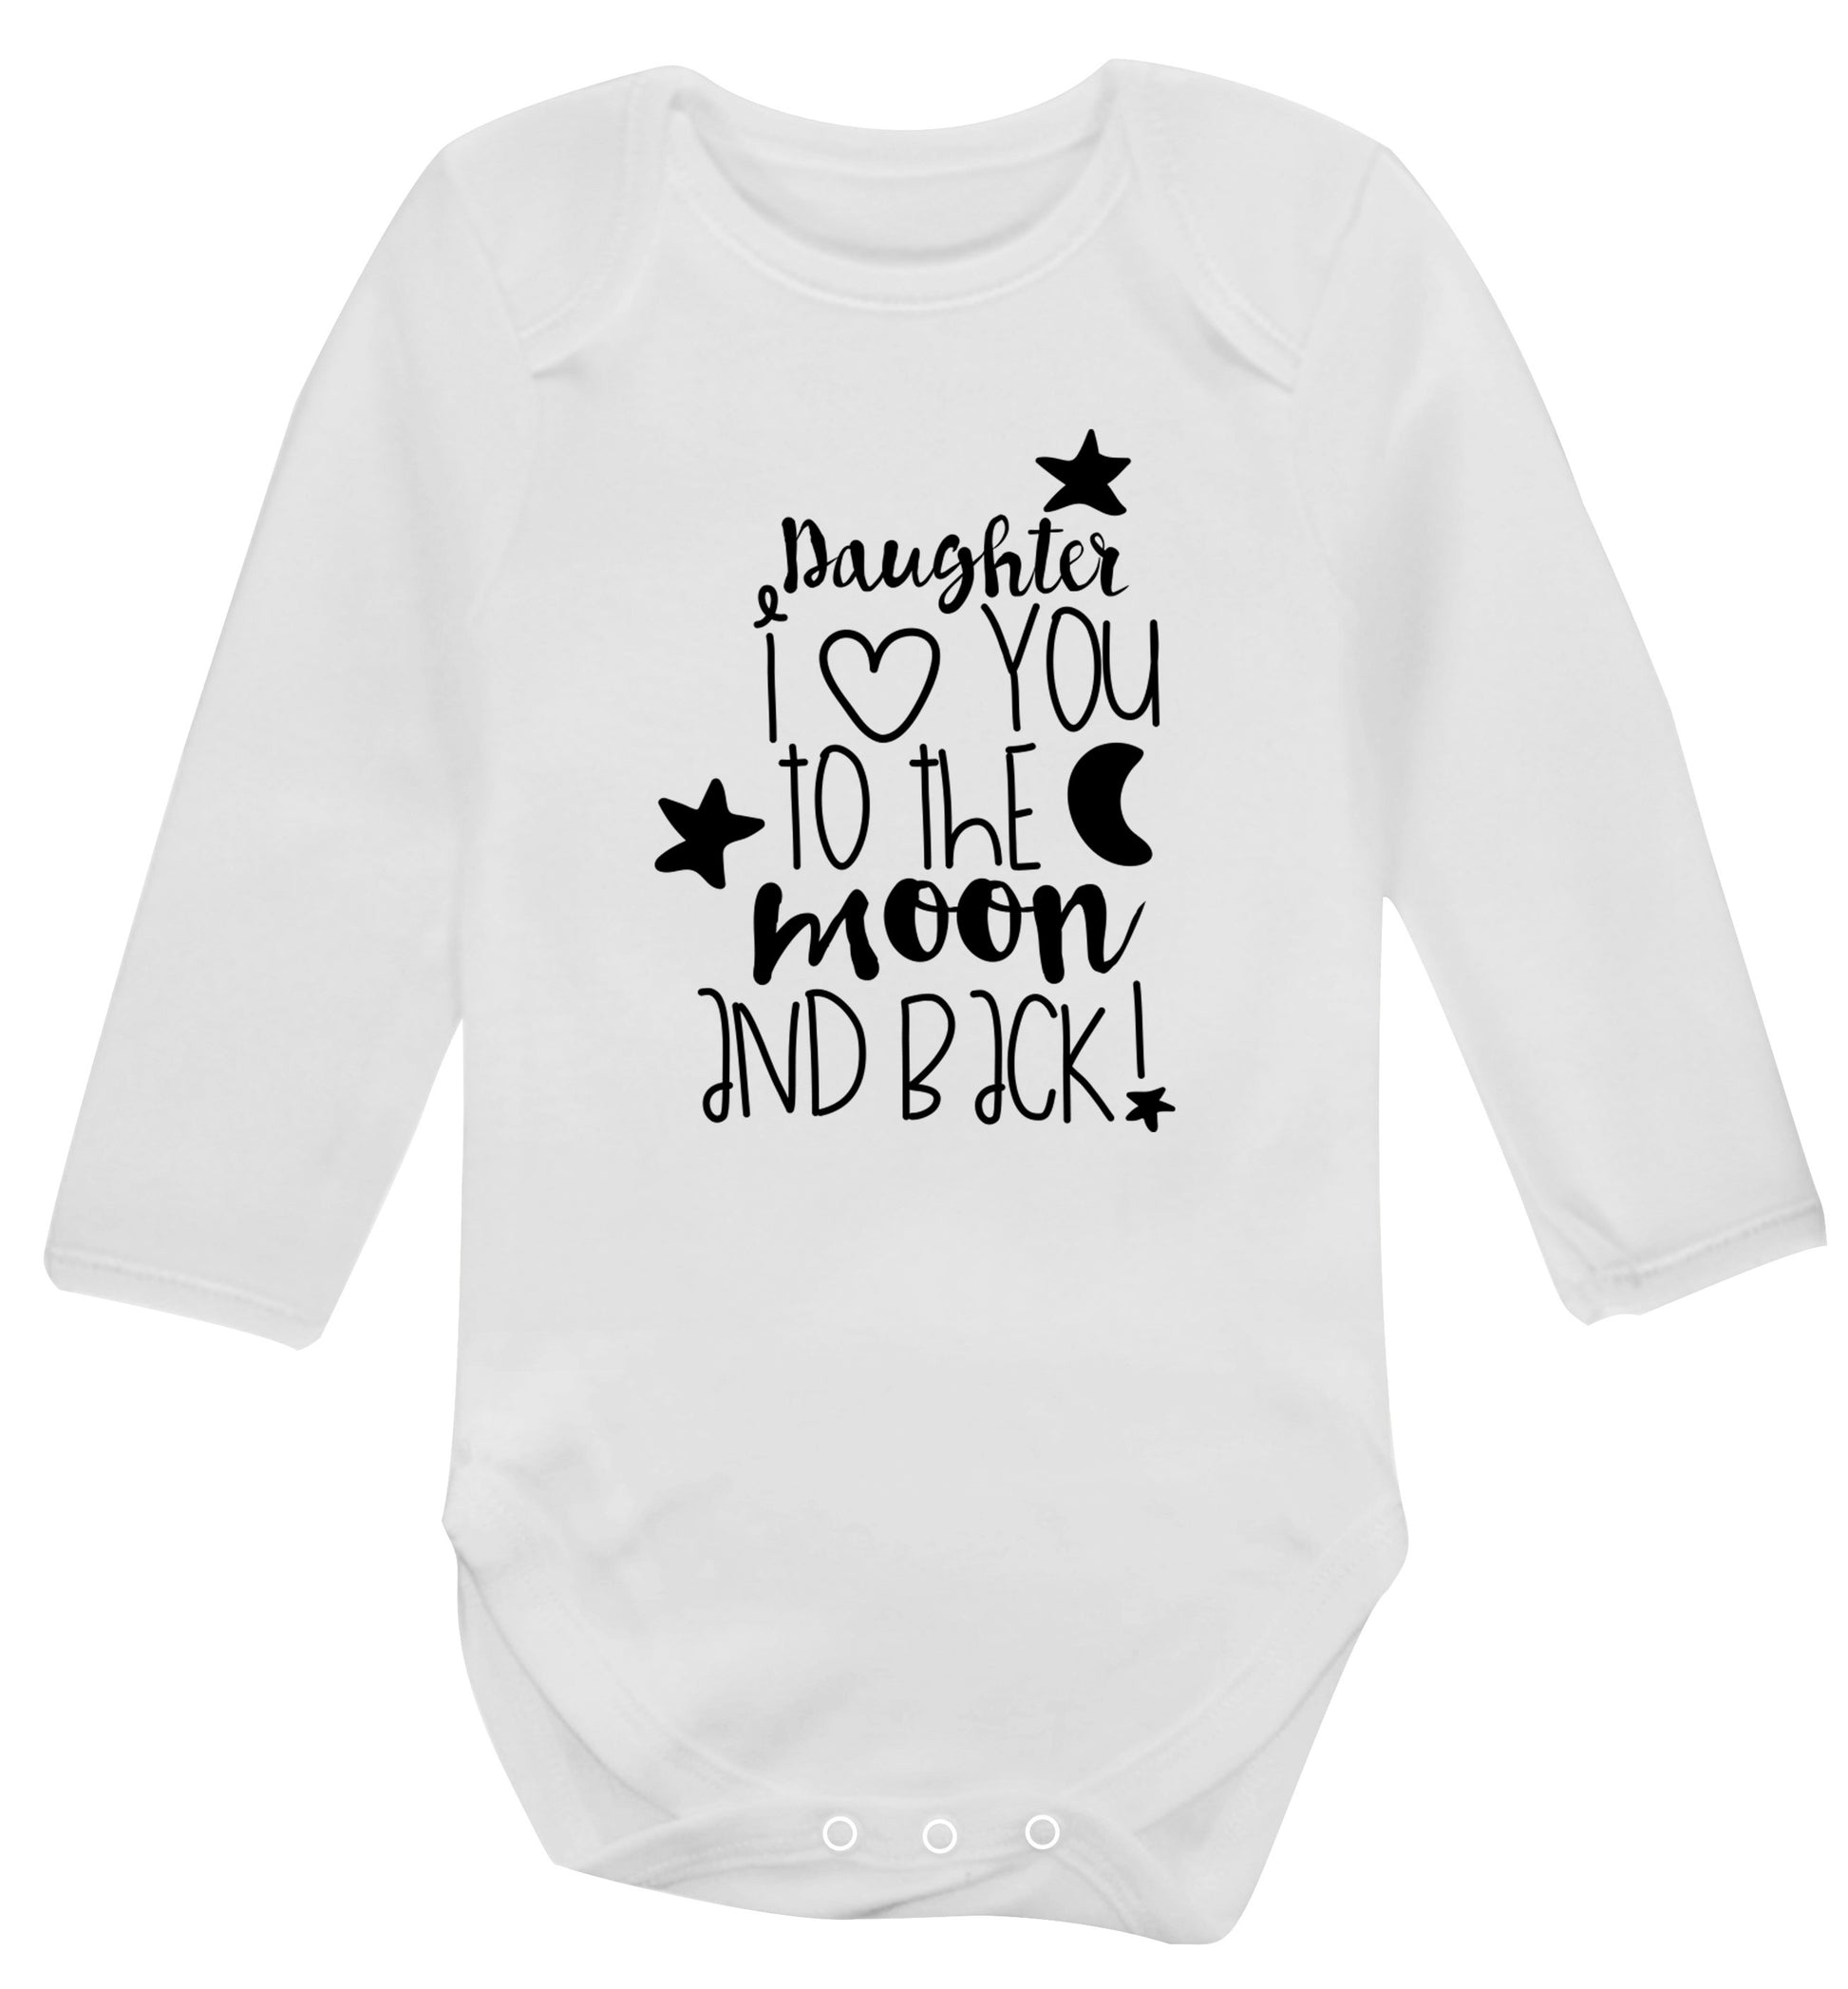 Daughter I love you to the moon and back Baby Vest long sleeved white 6-12 months